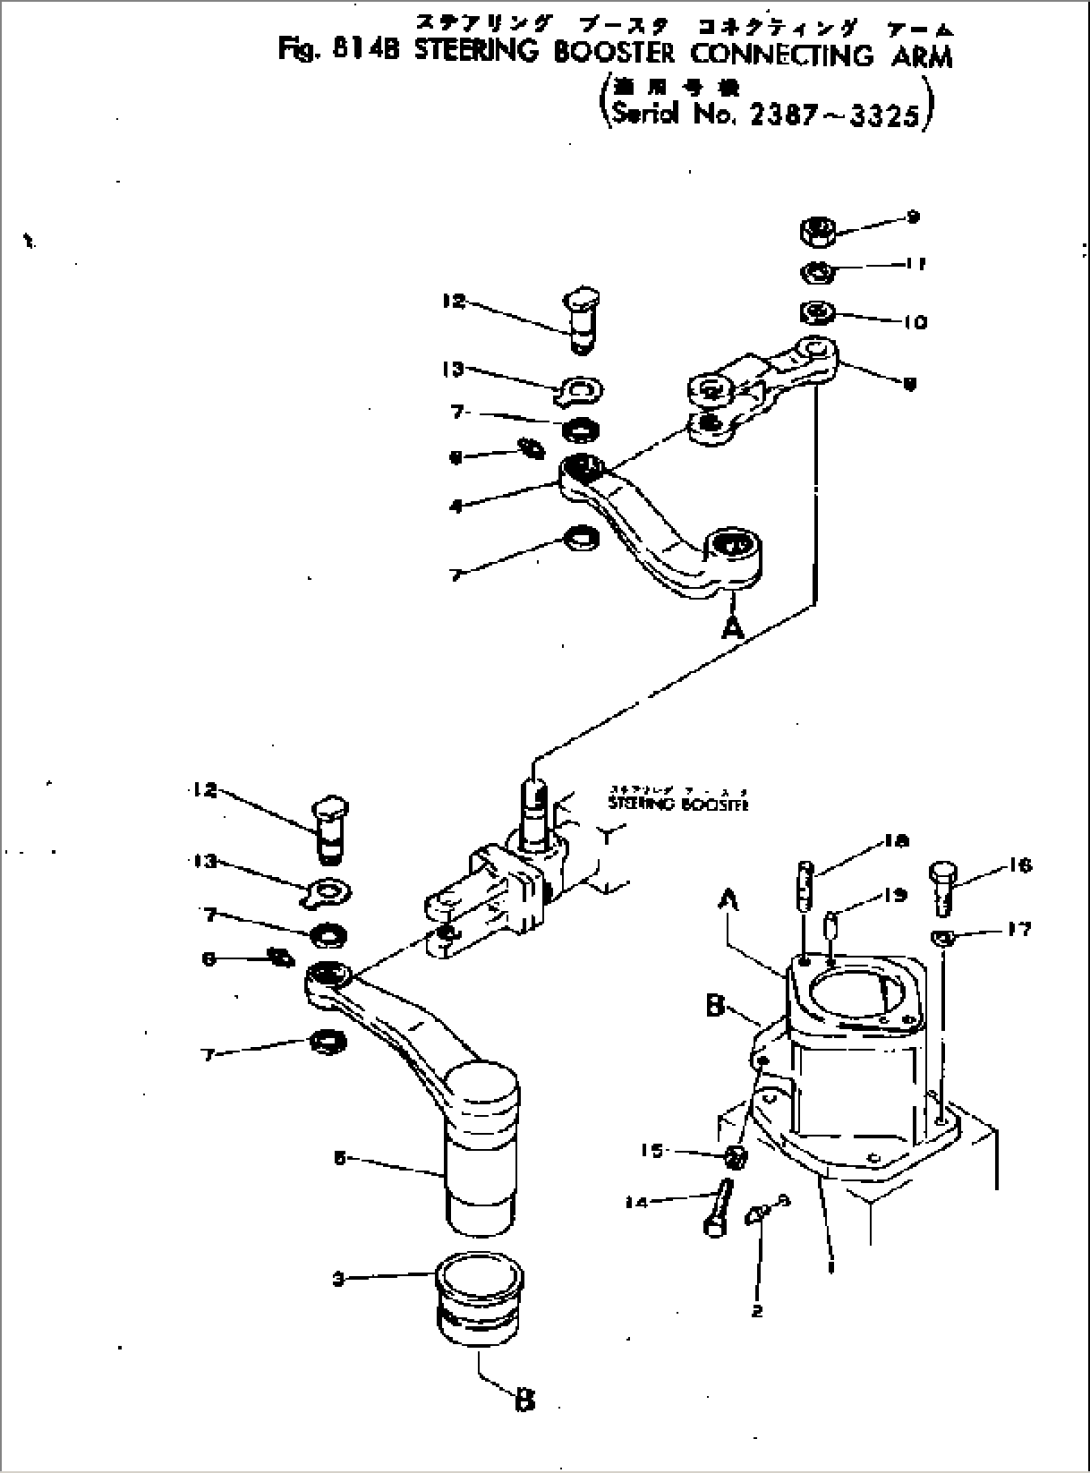 STEERING BOOSTER CONNECTING ARM(#2387-3325)